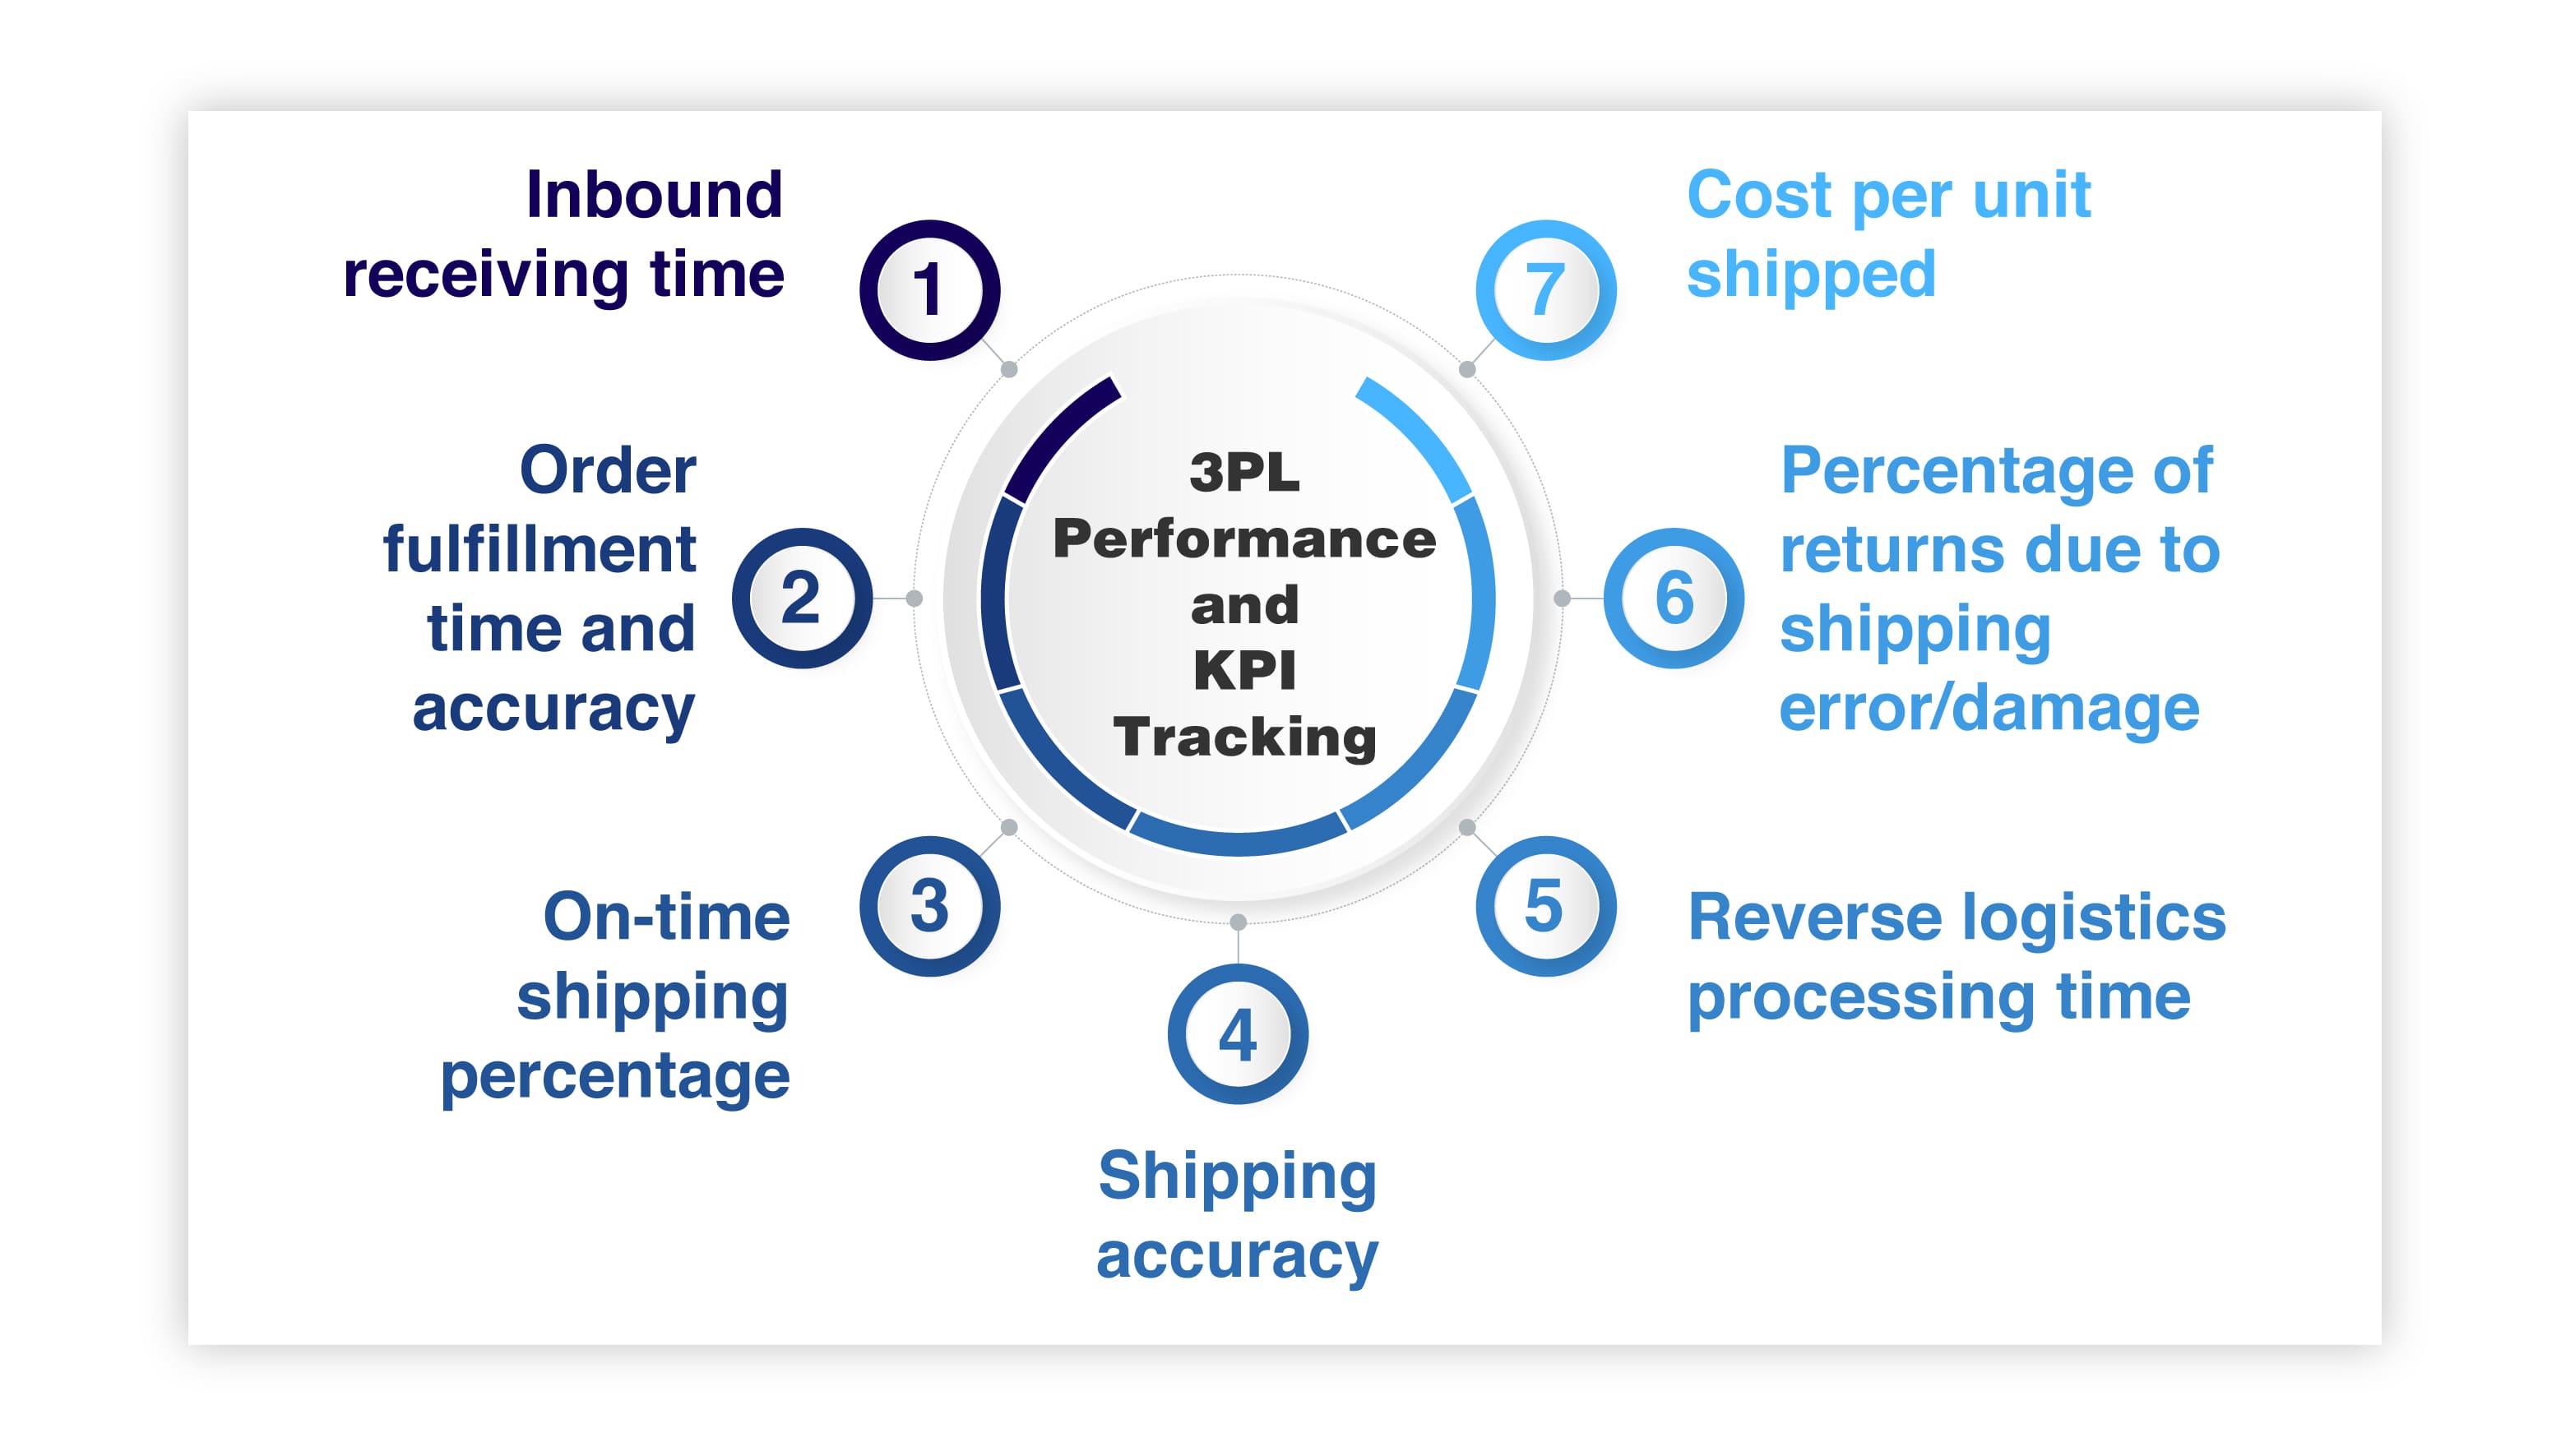 3PL Performance and KPI Tracking